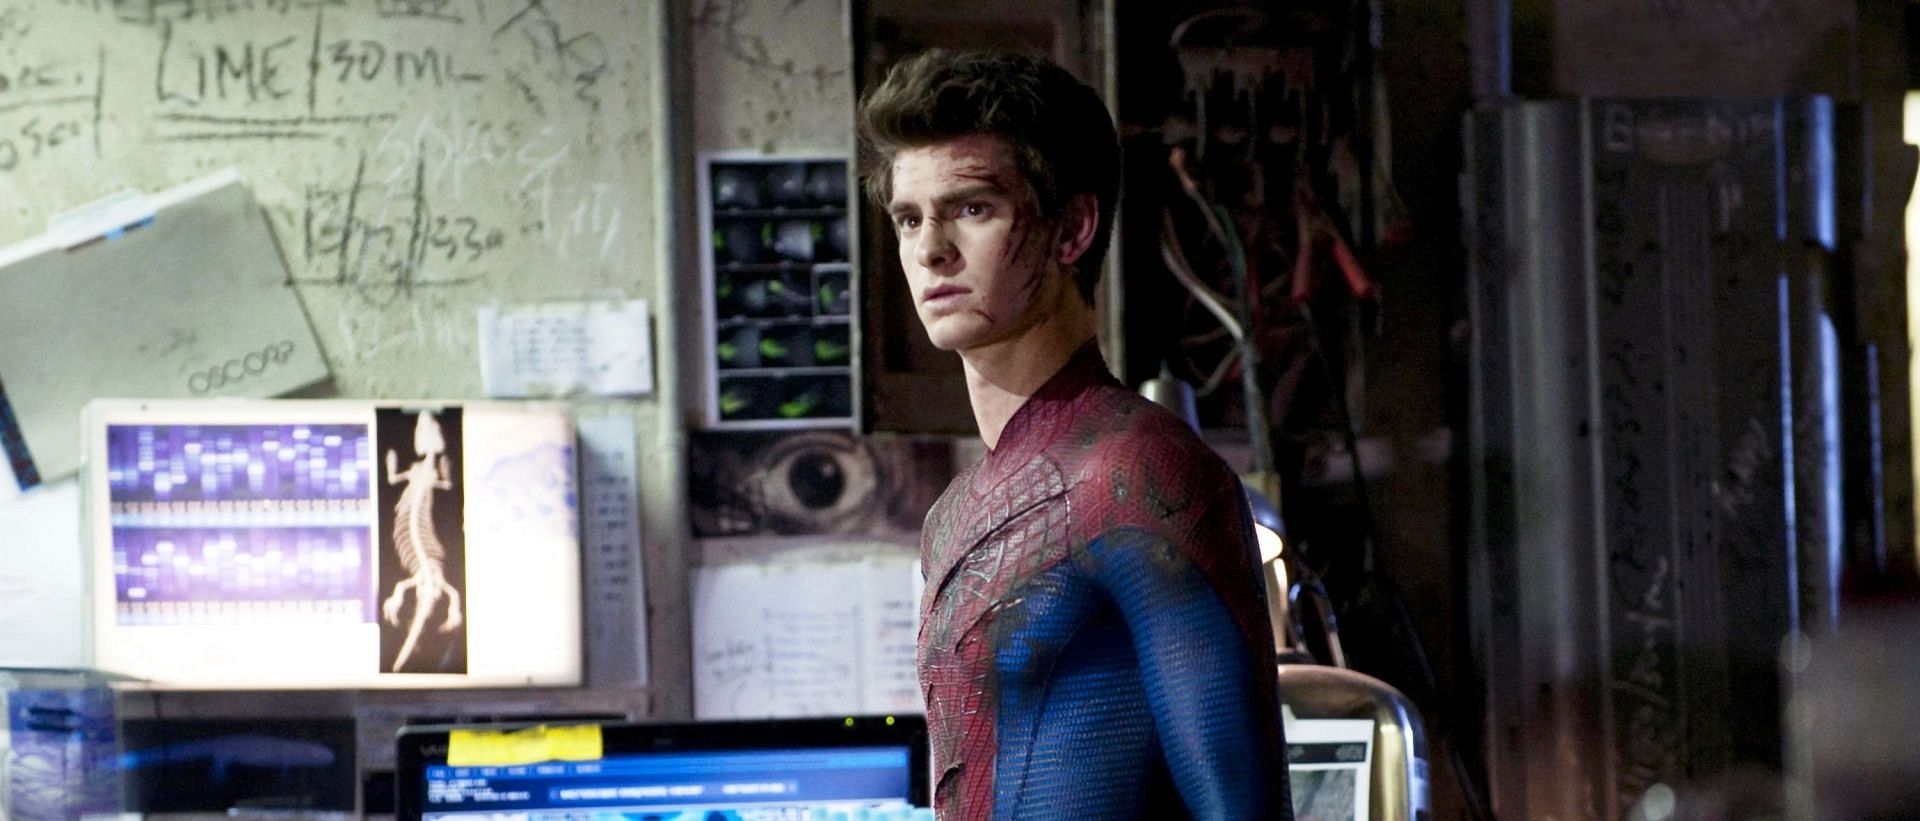 Andrew Garfield as Spider-Man in TASM (Image via Sony Pictures)